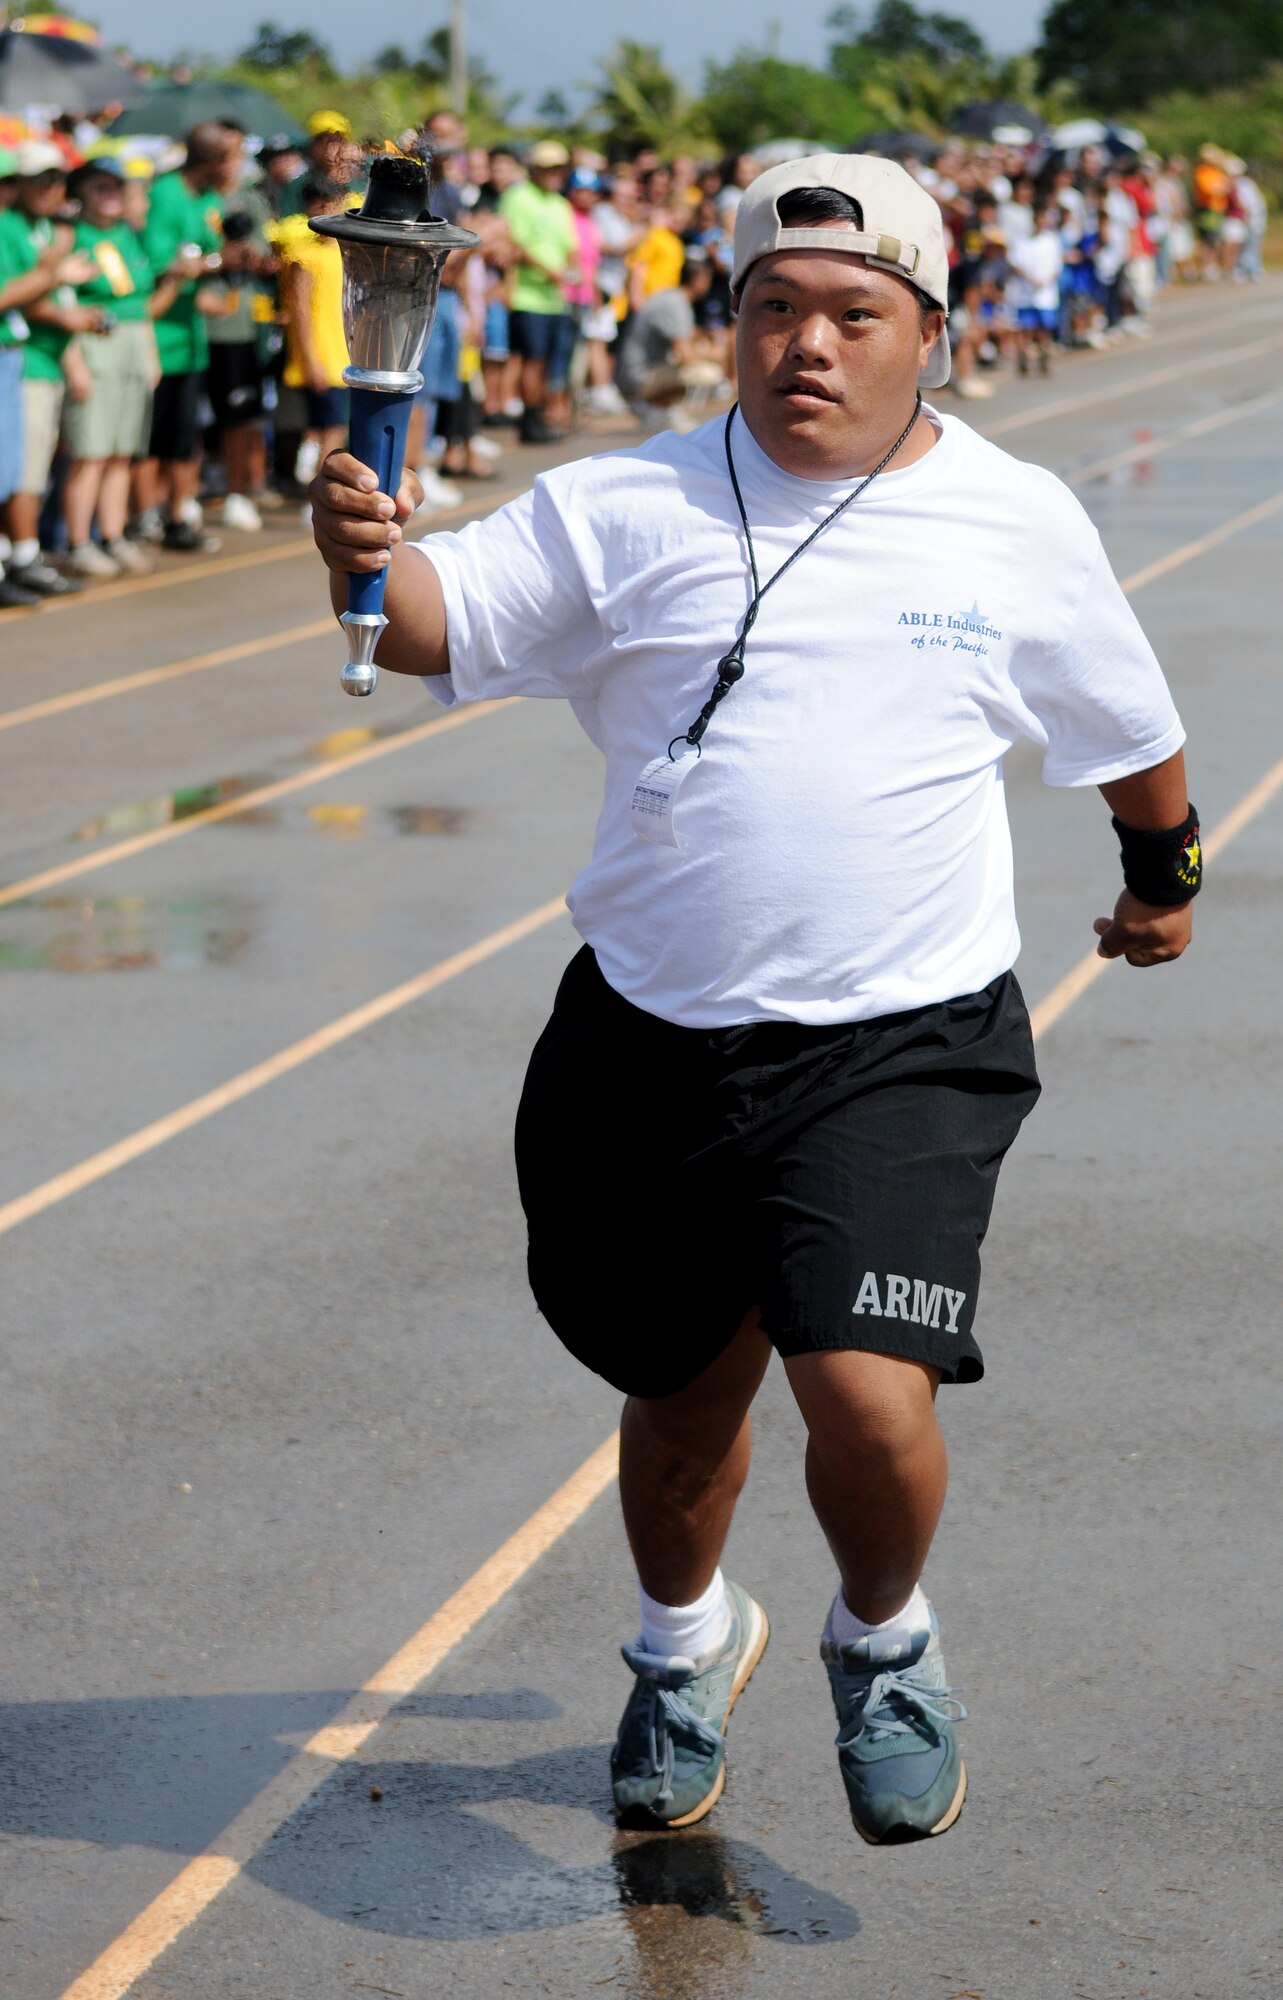 ANDERSEN AIR FORCE BASE, Guam - Quentin San Nicolas from Team Able Industries of the Pacific runs the last leg of the torch that will light the flame to start the Special Olympics at the Okkodo High School track March 14. Representatives from various Air Force and Navy squadrons and commands spent the past 10 weeks coaching athletes at their sister schools for the big event.(U.S. Air Force photo by Airman 1st Class Courtney Witt)

